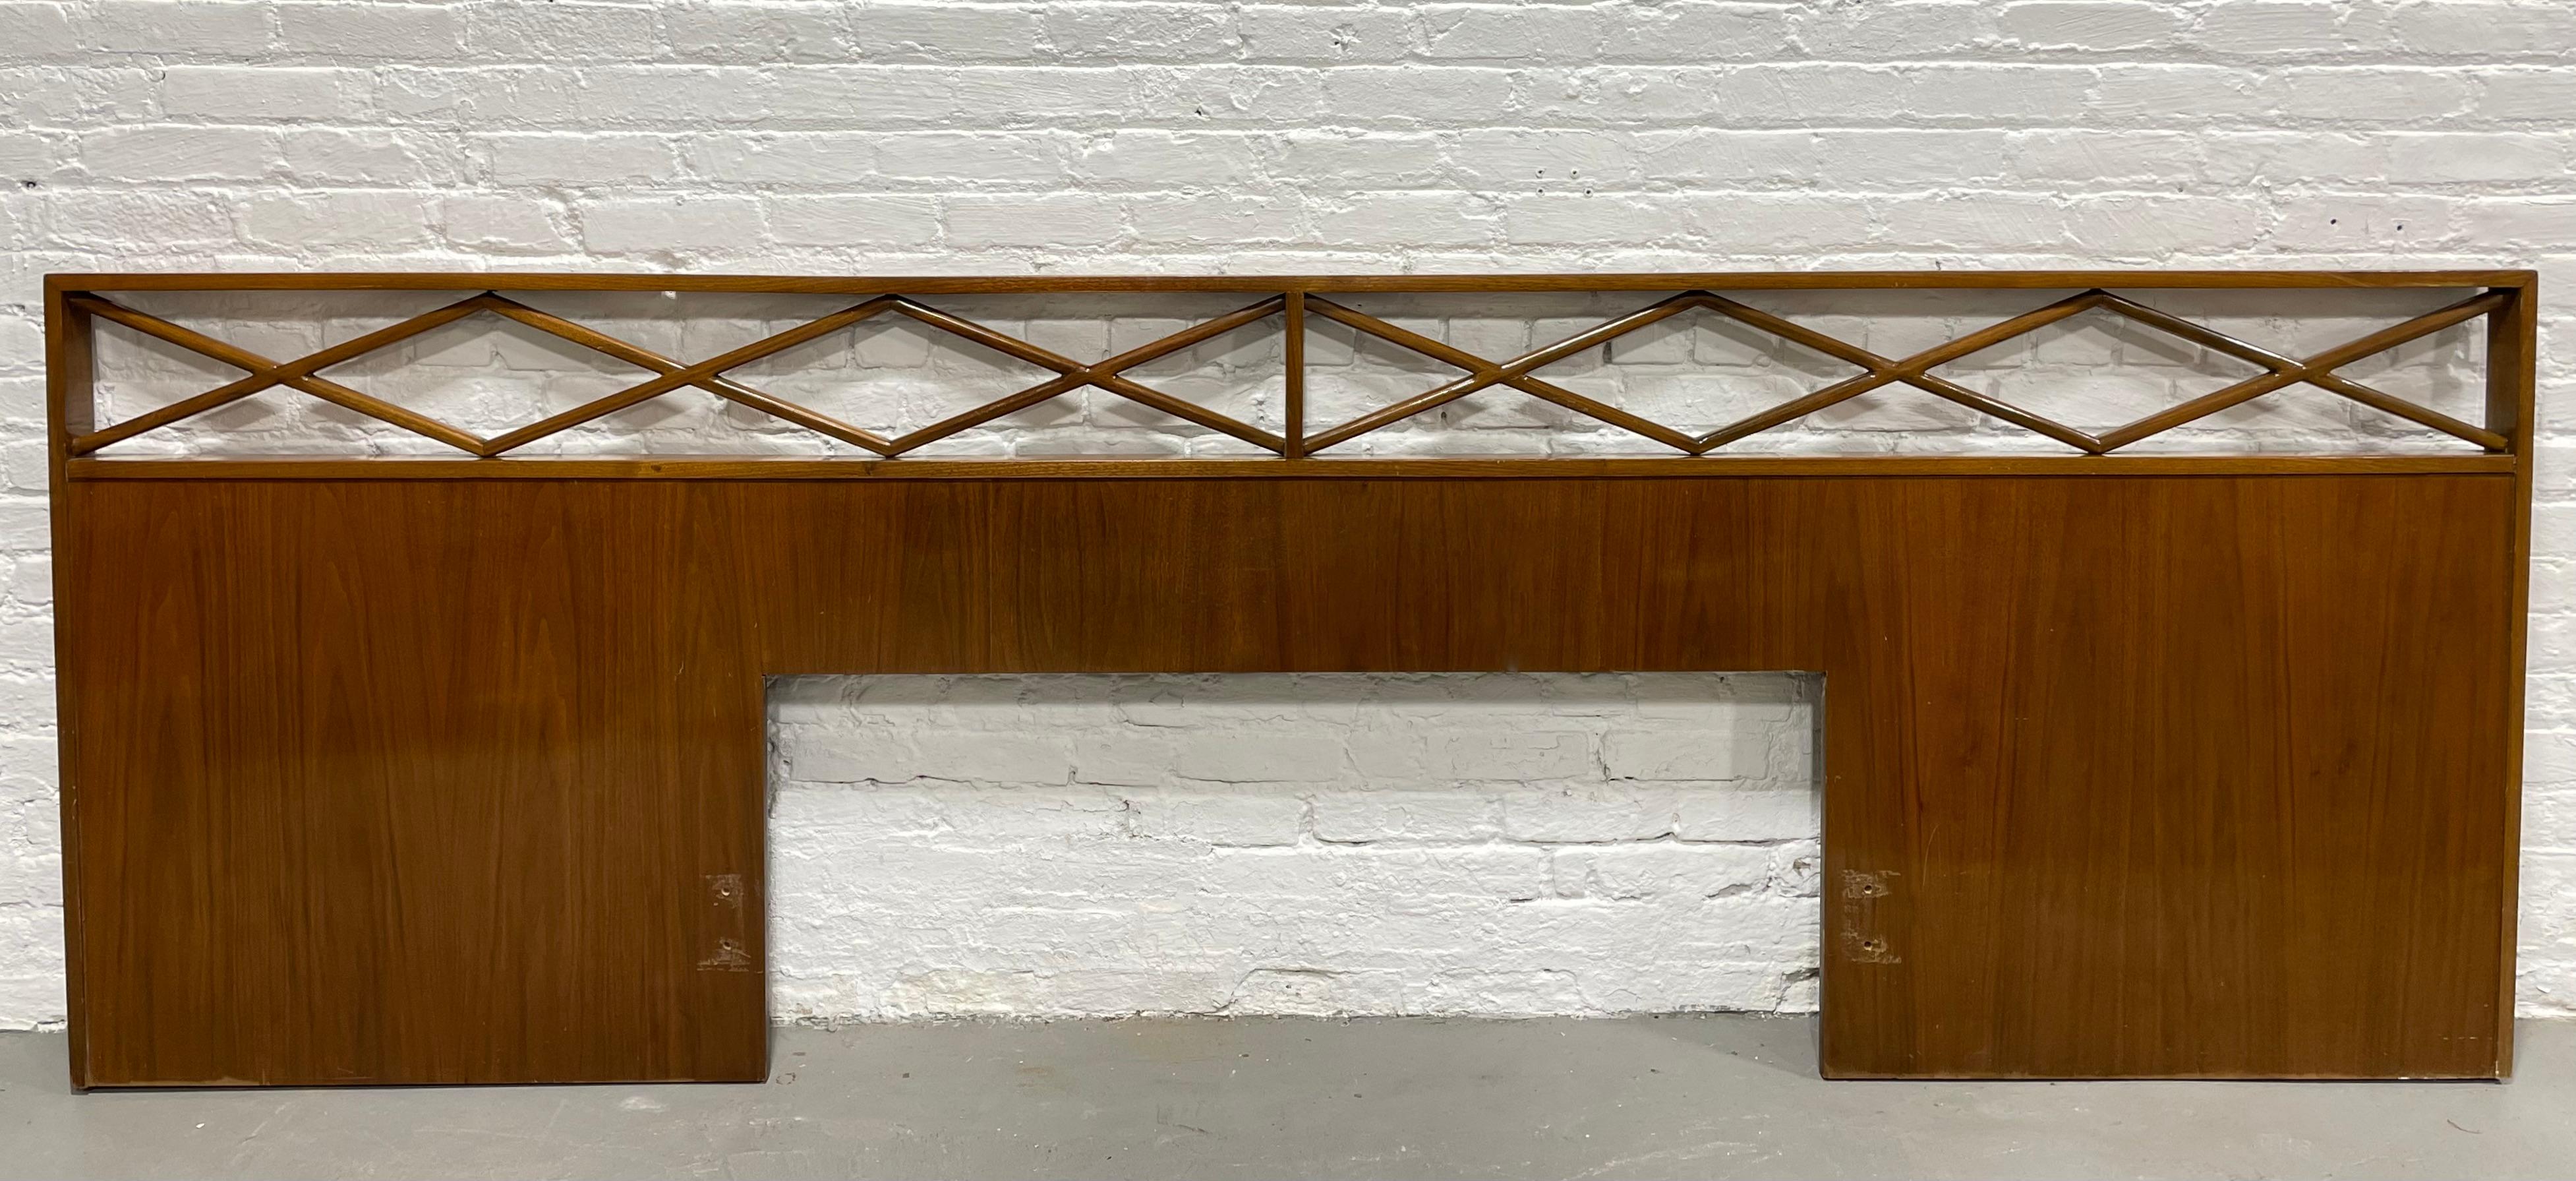 Extra long Mid-Century Modern headboard that may be used for a king, queen or full bed, depending on where you choose to attach the metal frame. Phenomenal design in a high gloss finish. The holes are already made for a full bed but they can easily